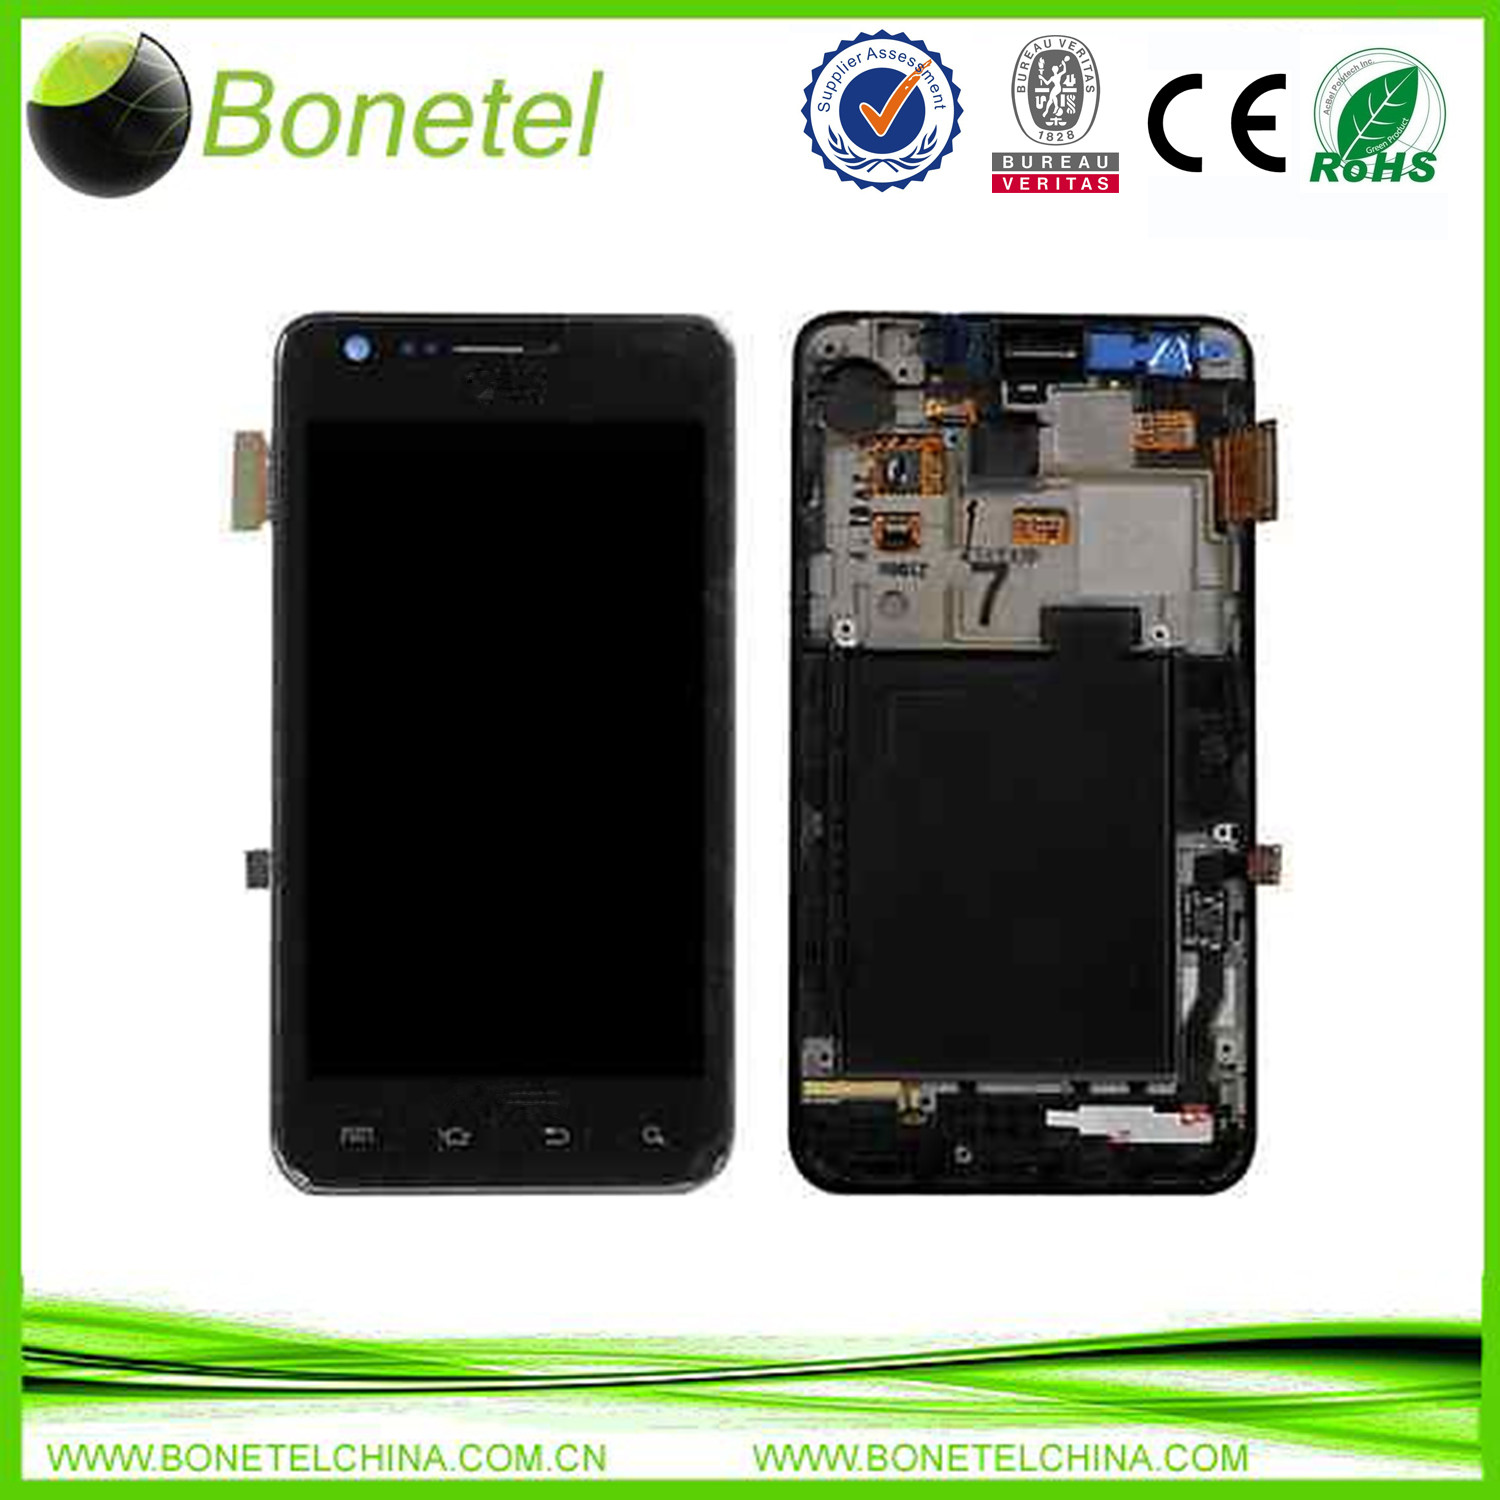 Samsung Galaxy S2 ATT i777 LCD Display Touch Digitizer ScreenAssembly With Frame